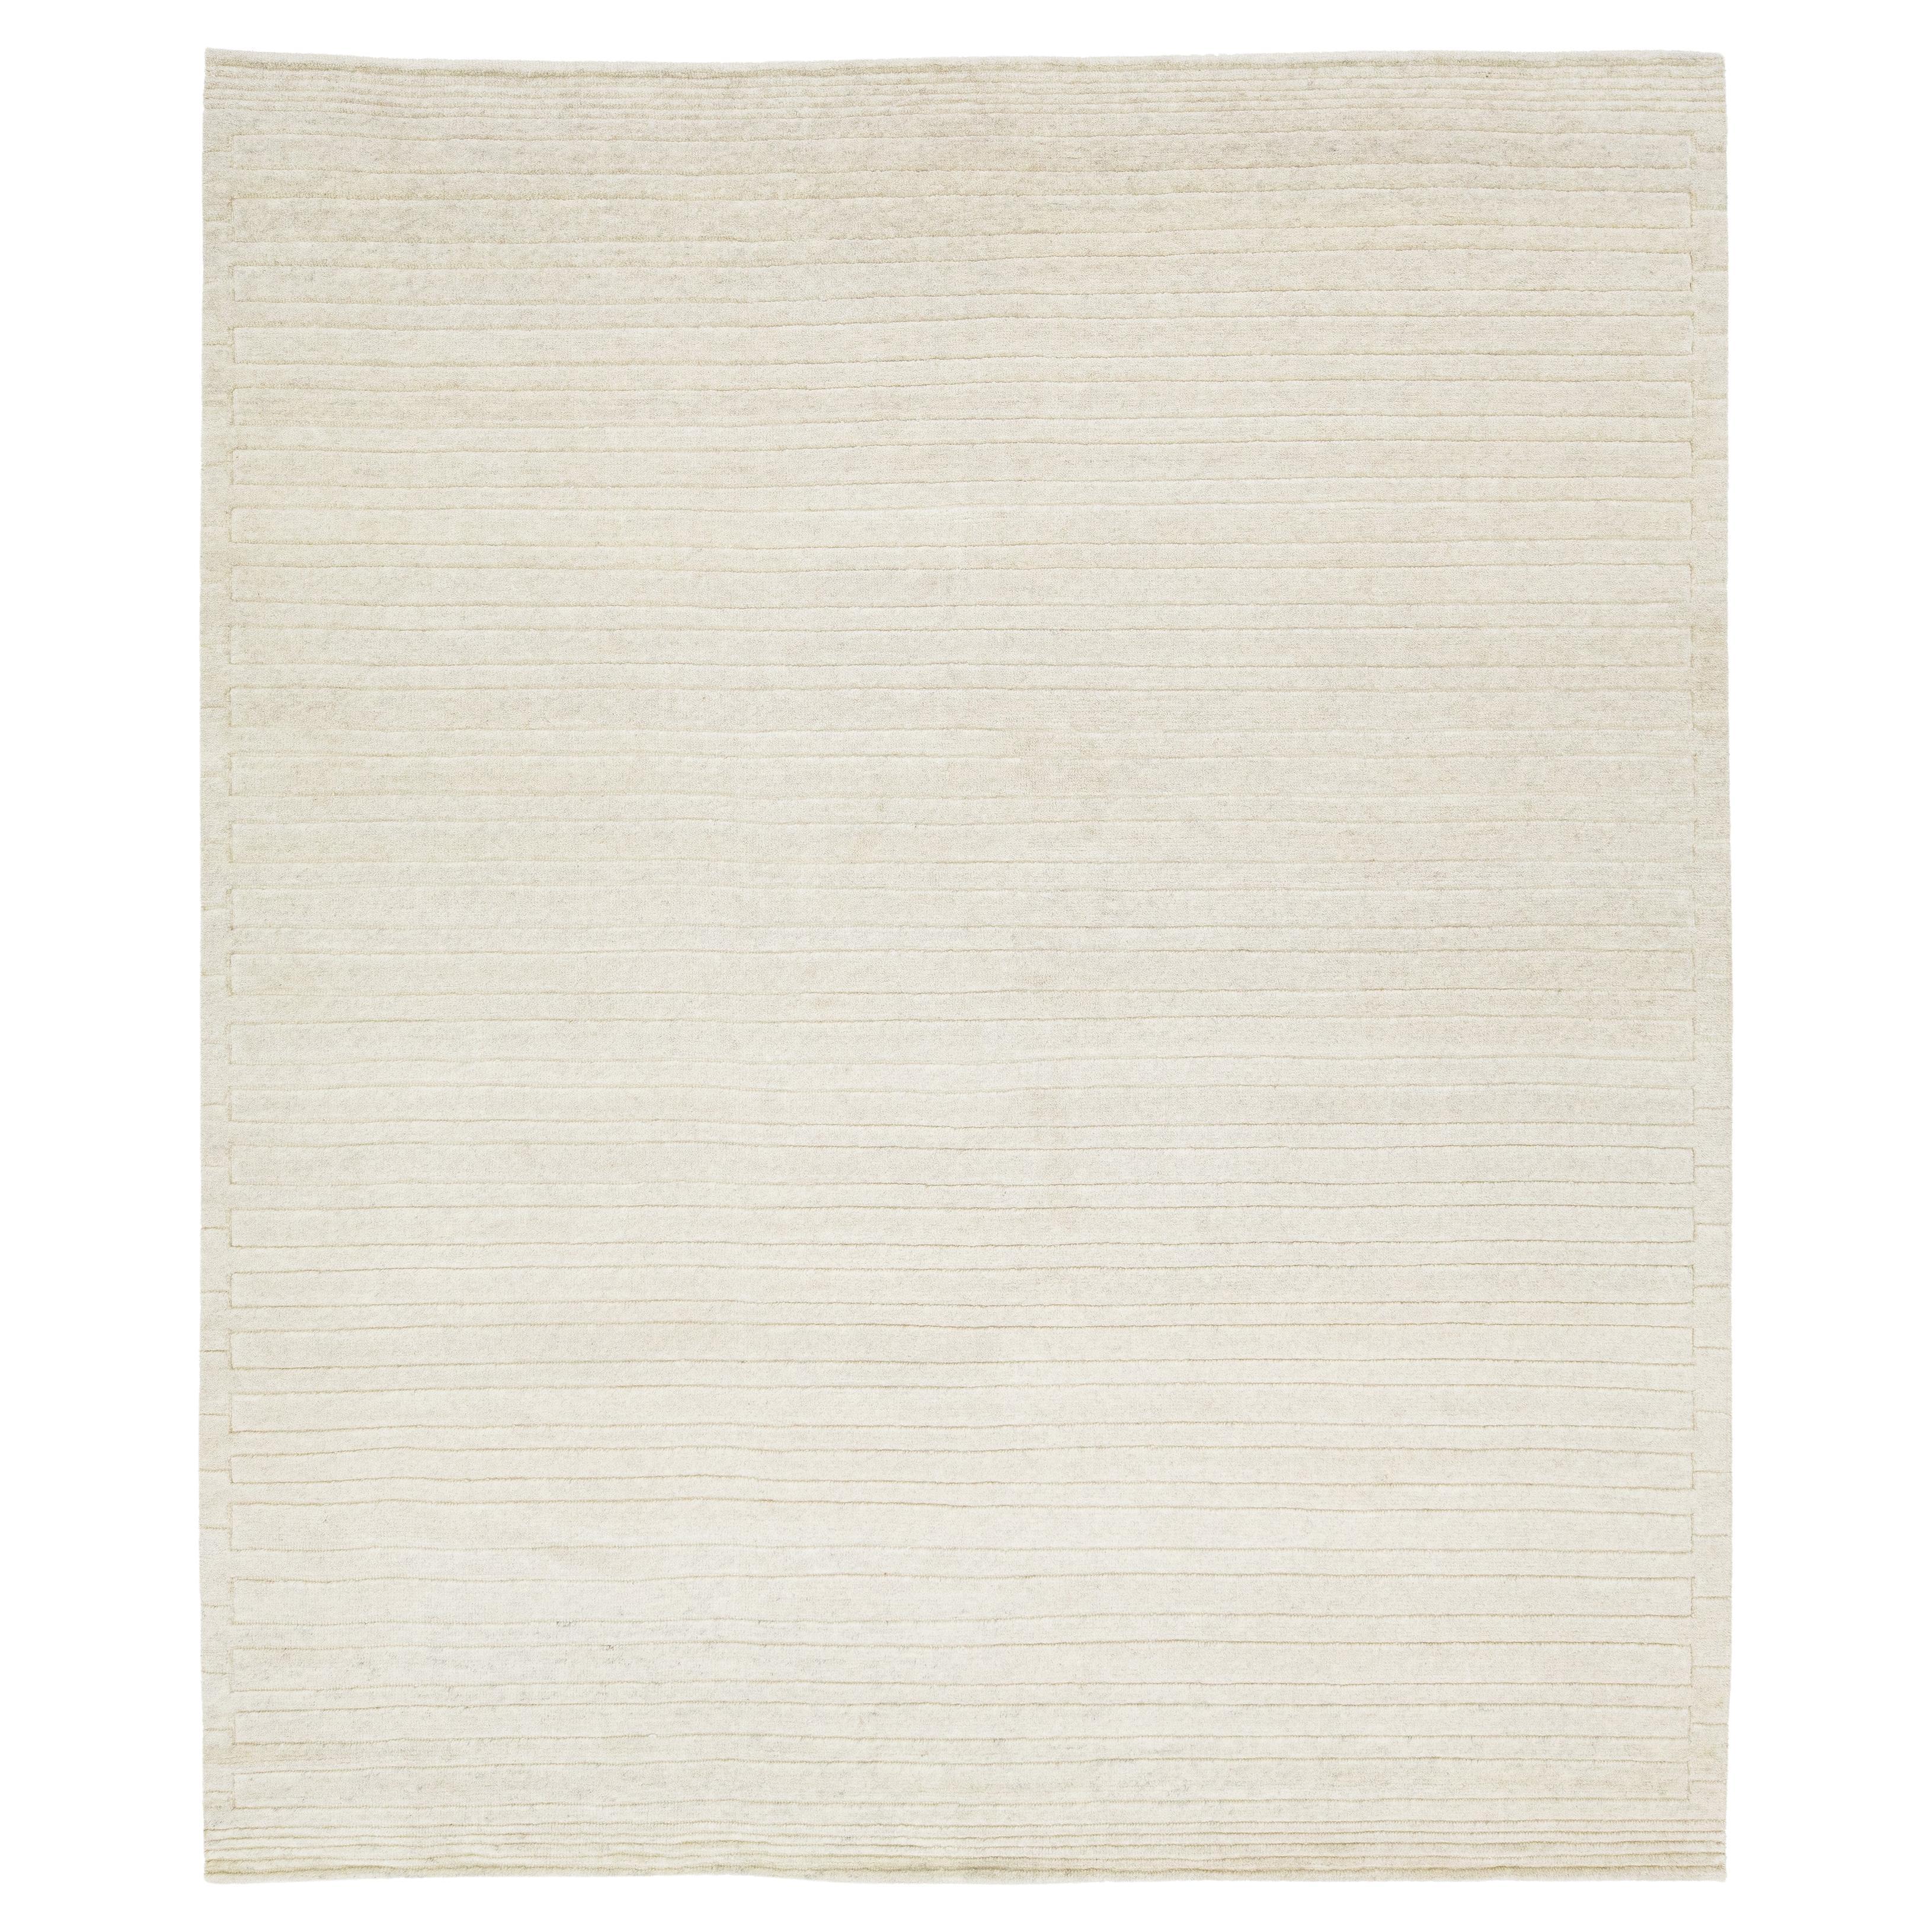 Ivory Moroccan Style Contemporary Wool Rug With a Striped Pattern By Apadana